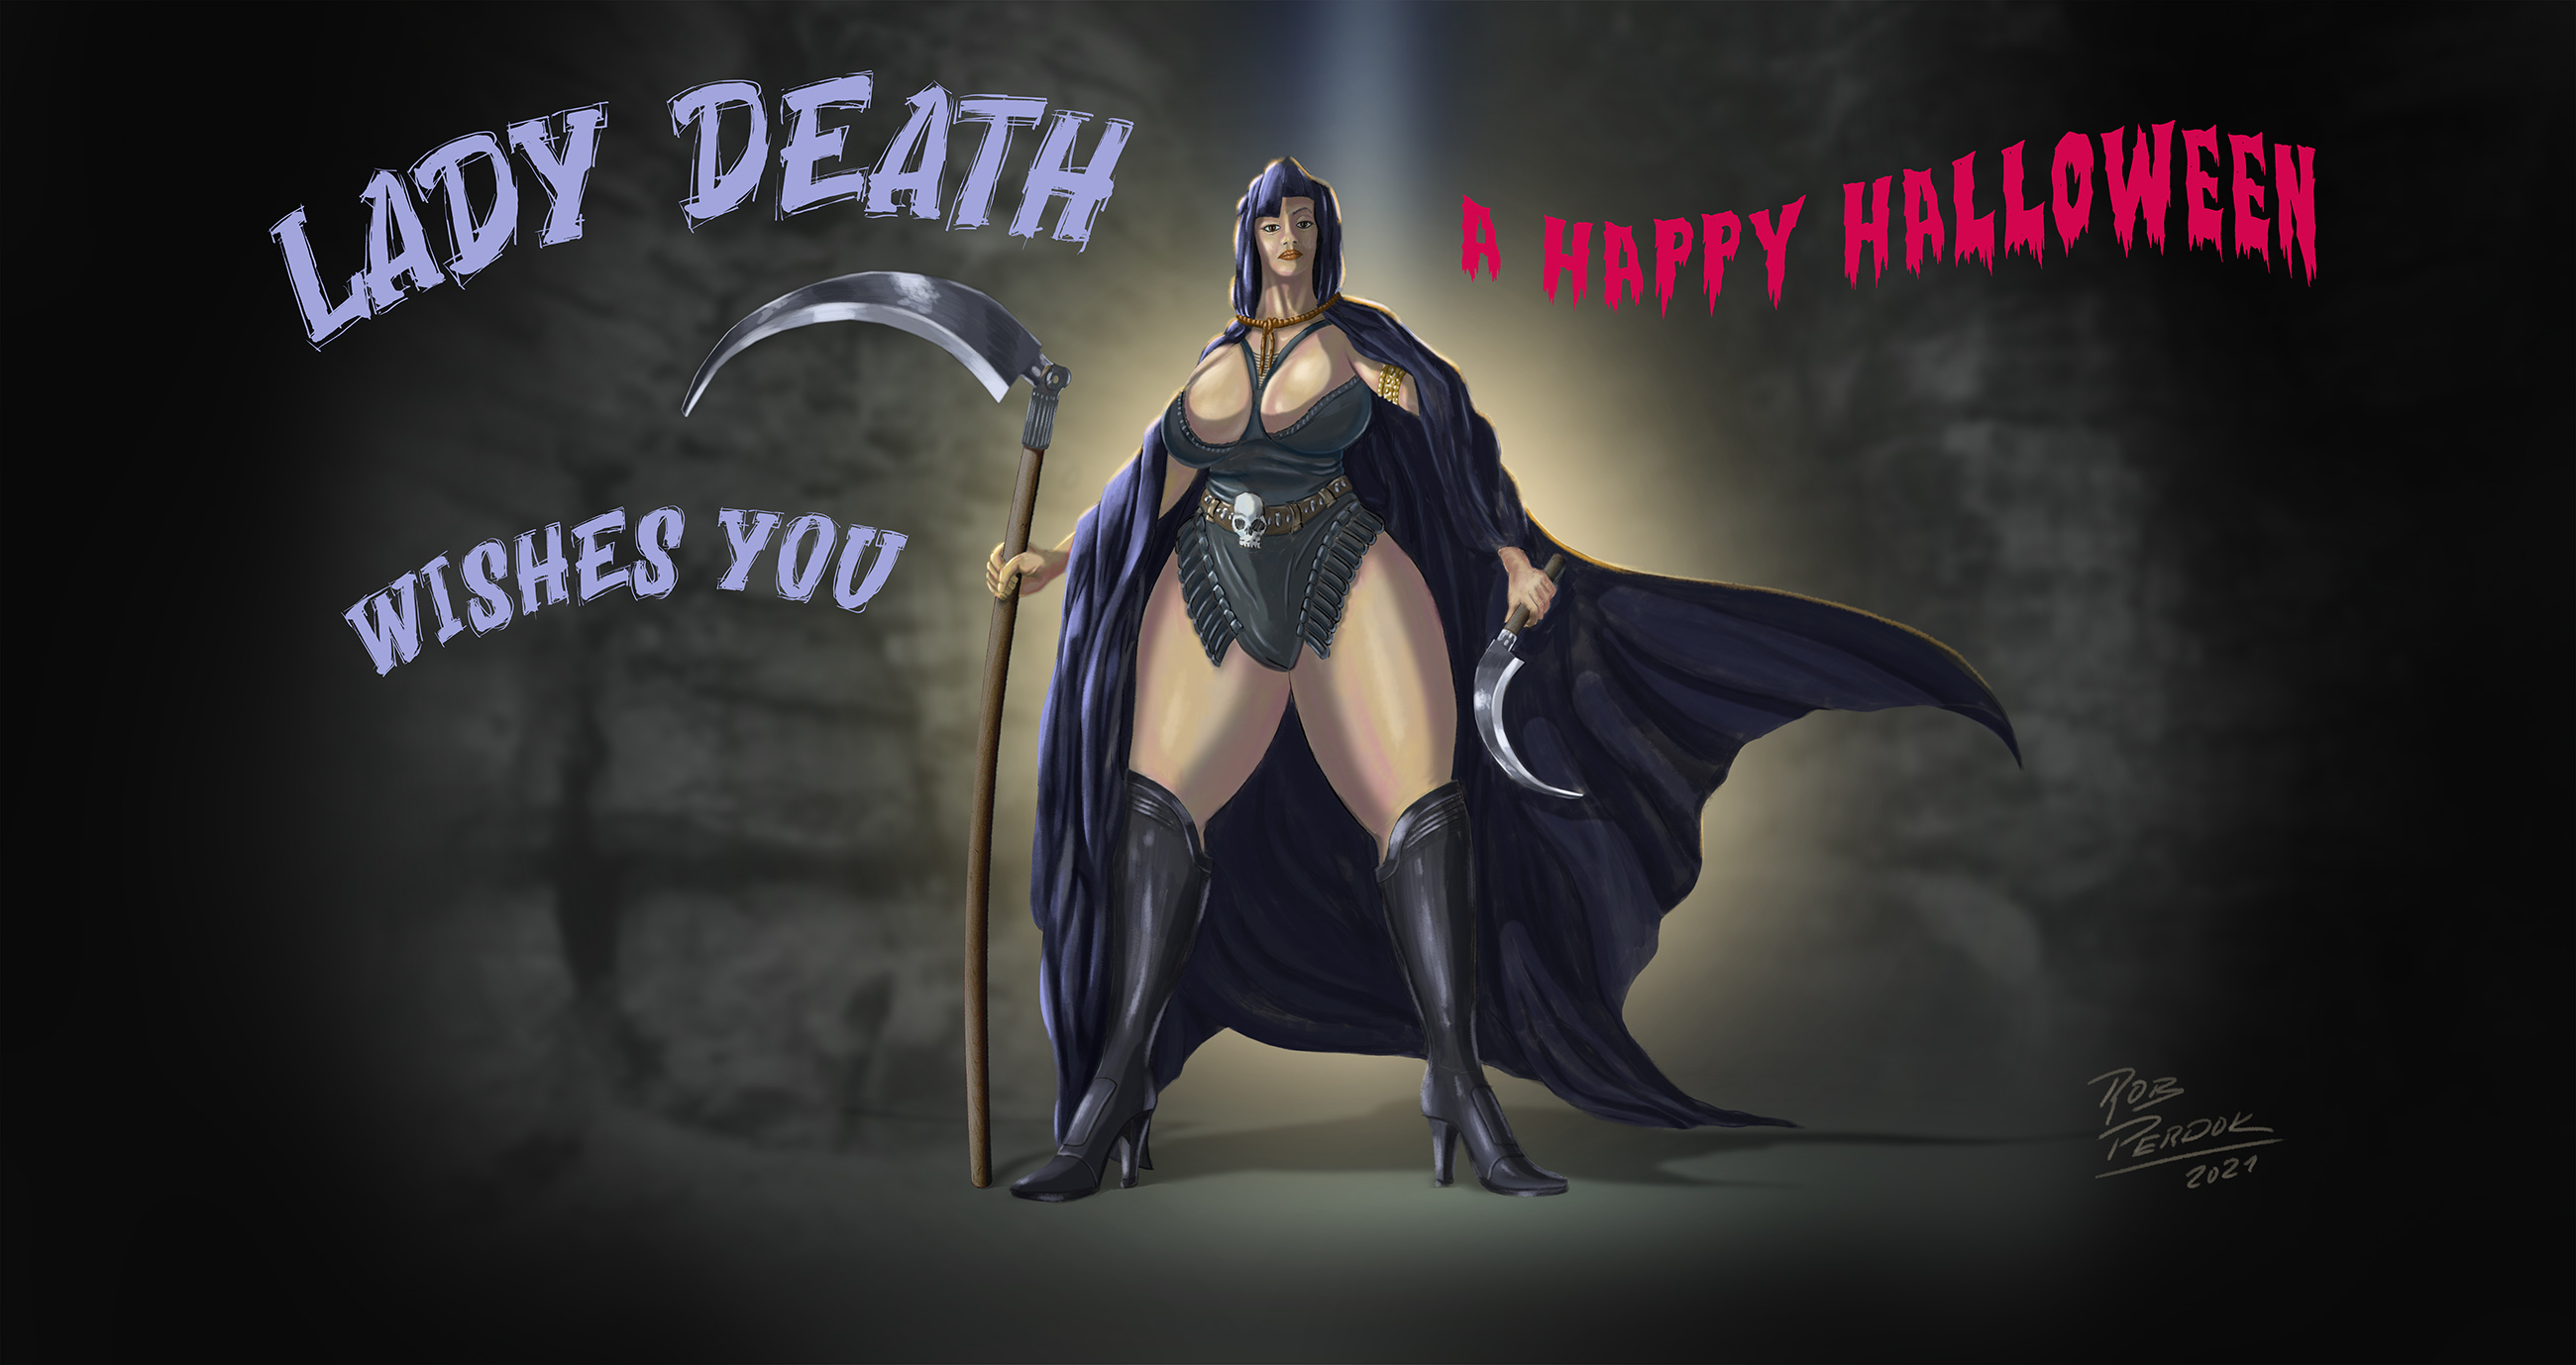 Lady Death wishes a Happy Halloween